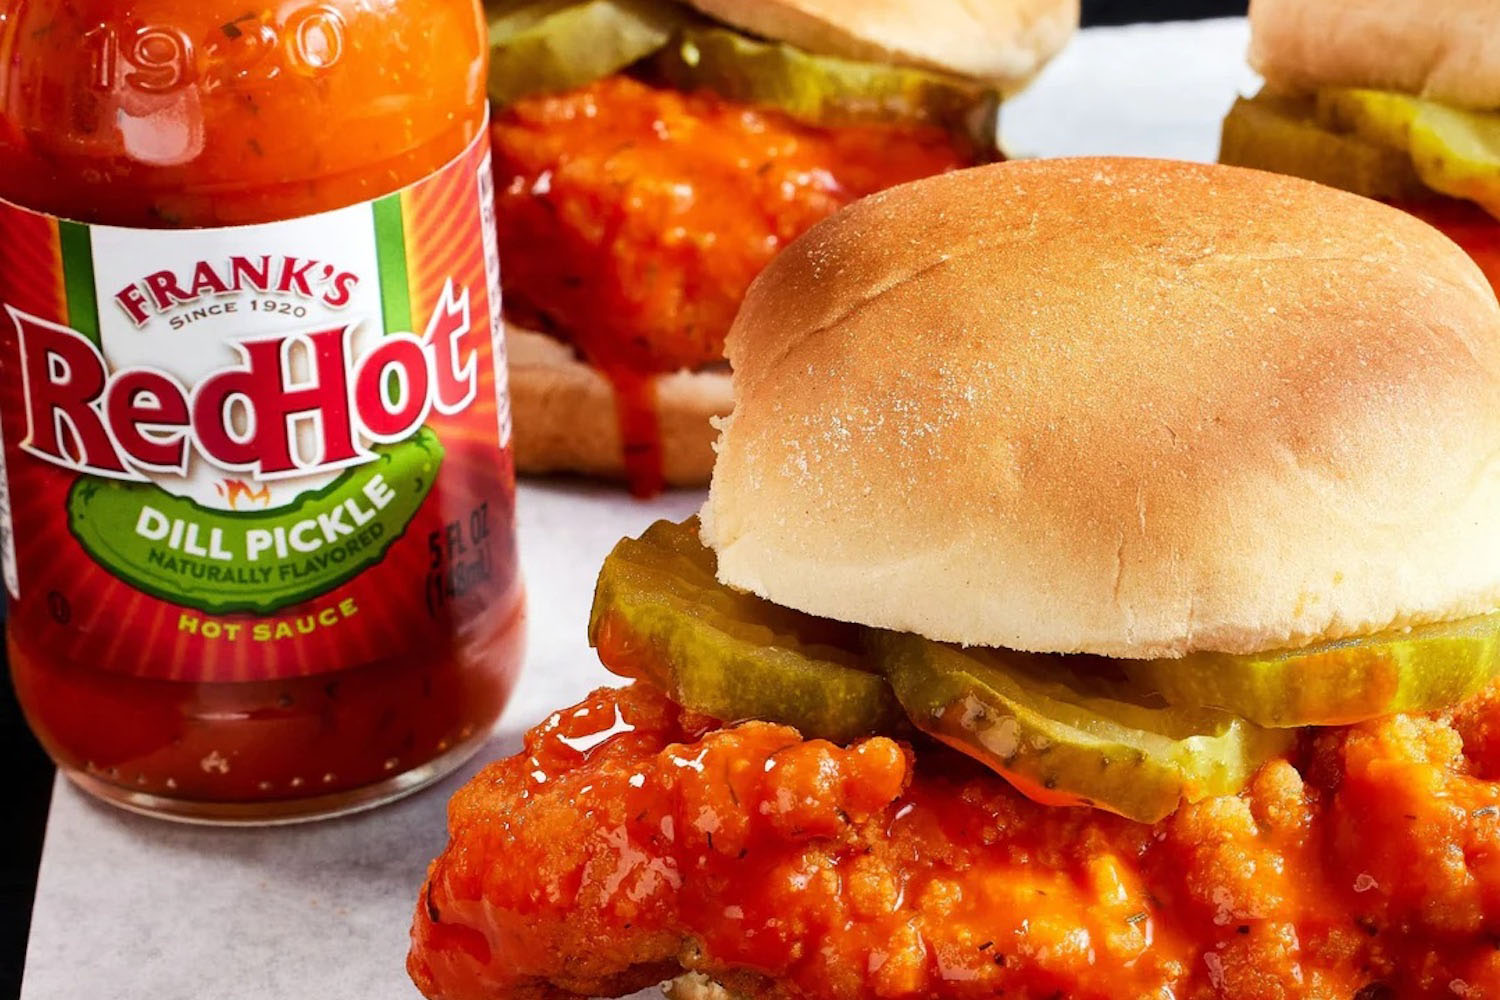 a bottle of Frank's RedHot Dill Pickle Hot Sauce next to a chicken sandwhich